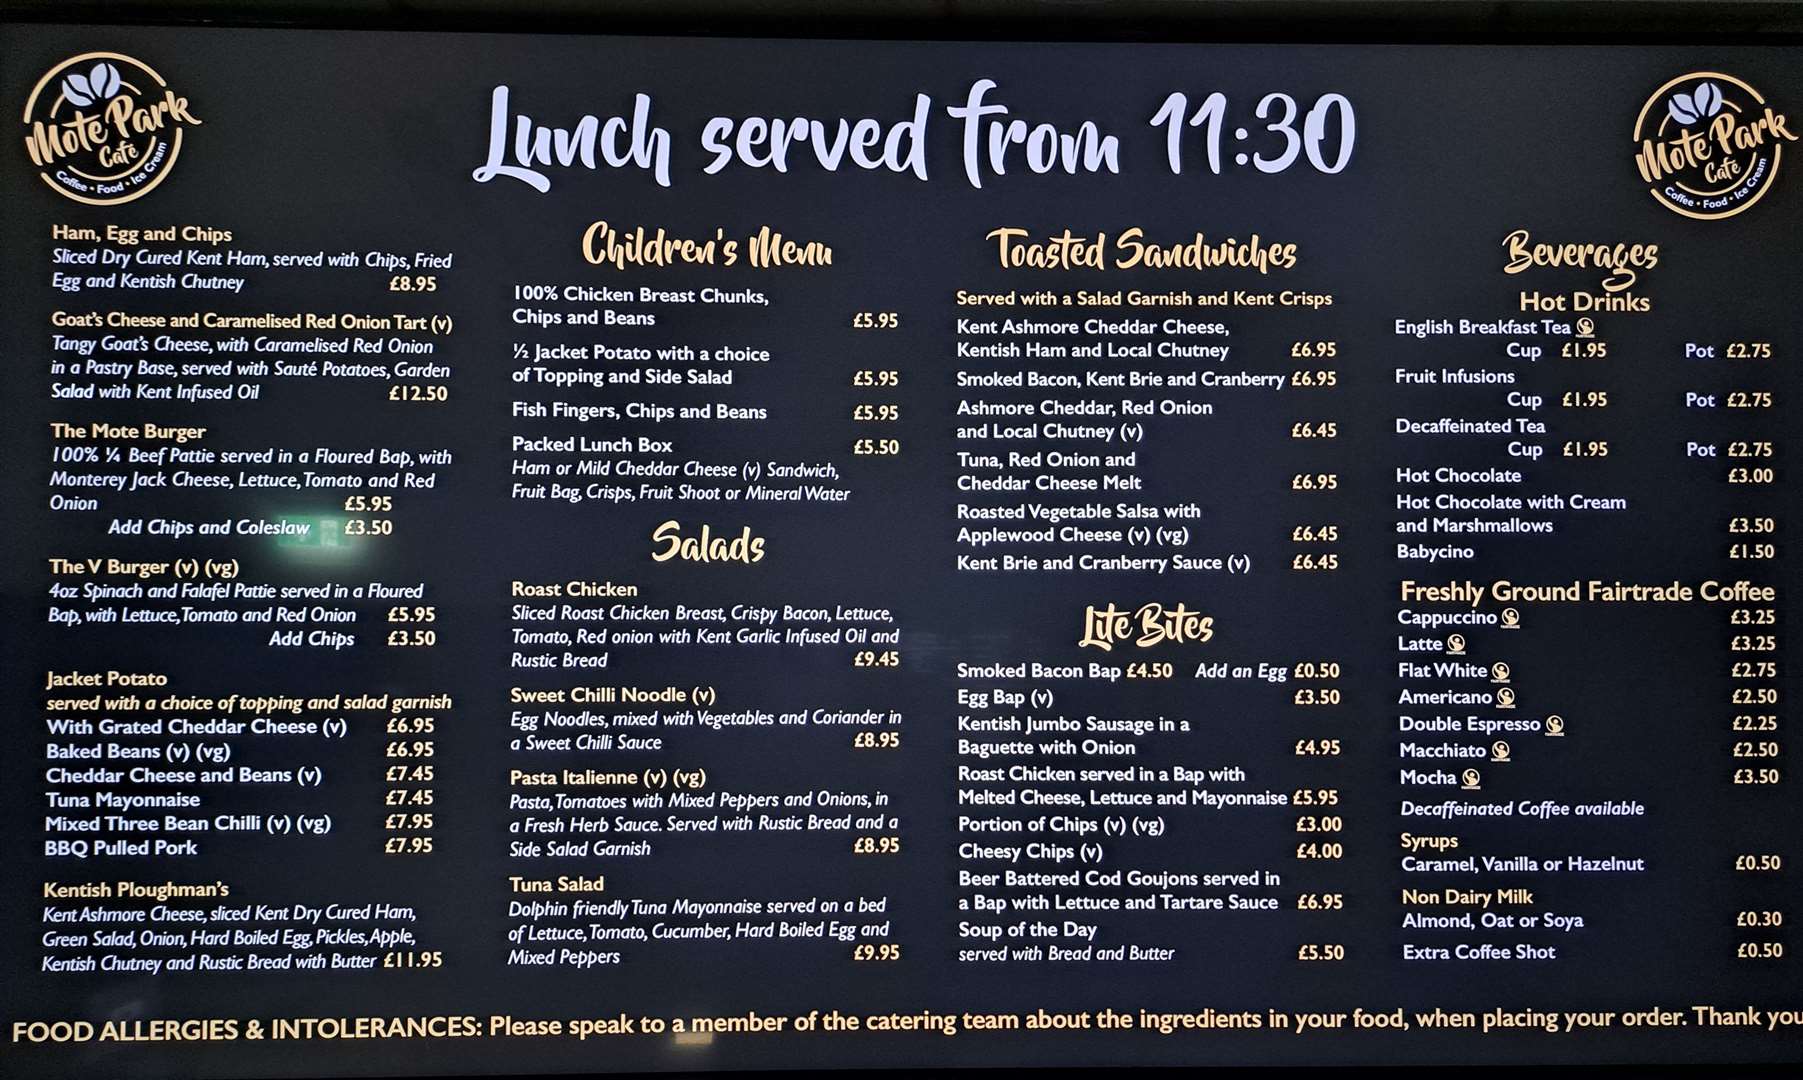 The lunch menu